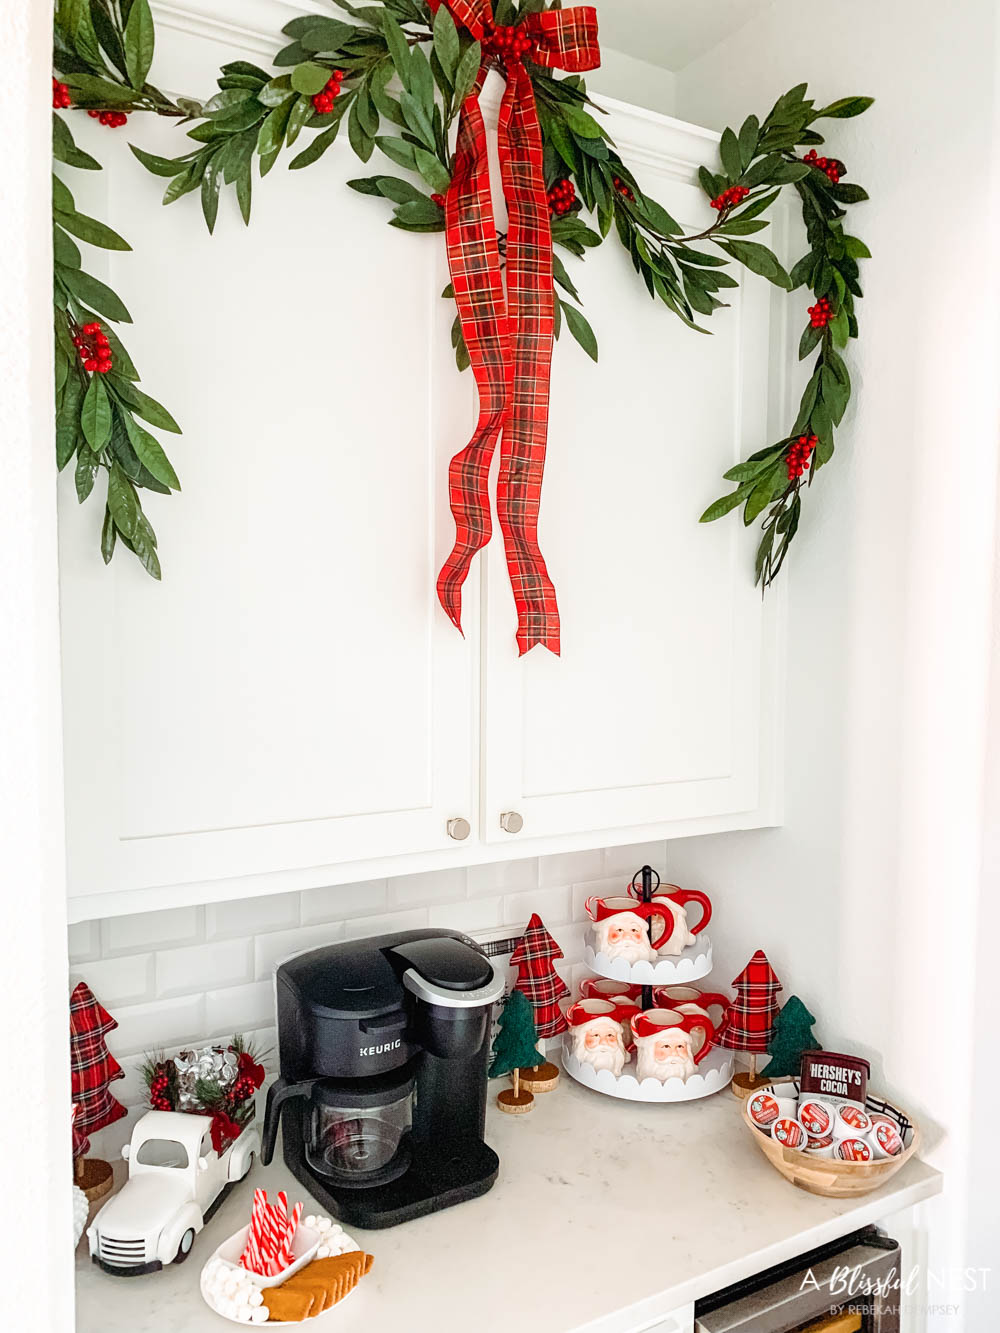 A hot cocoa station in a butlers pantry with santa mugs, graland and a Keurig machine.